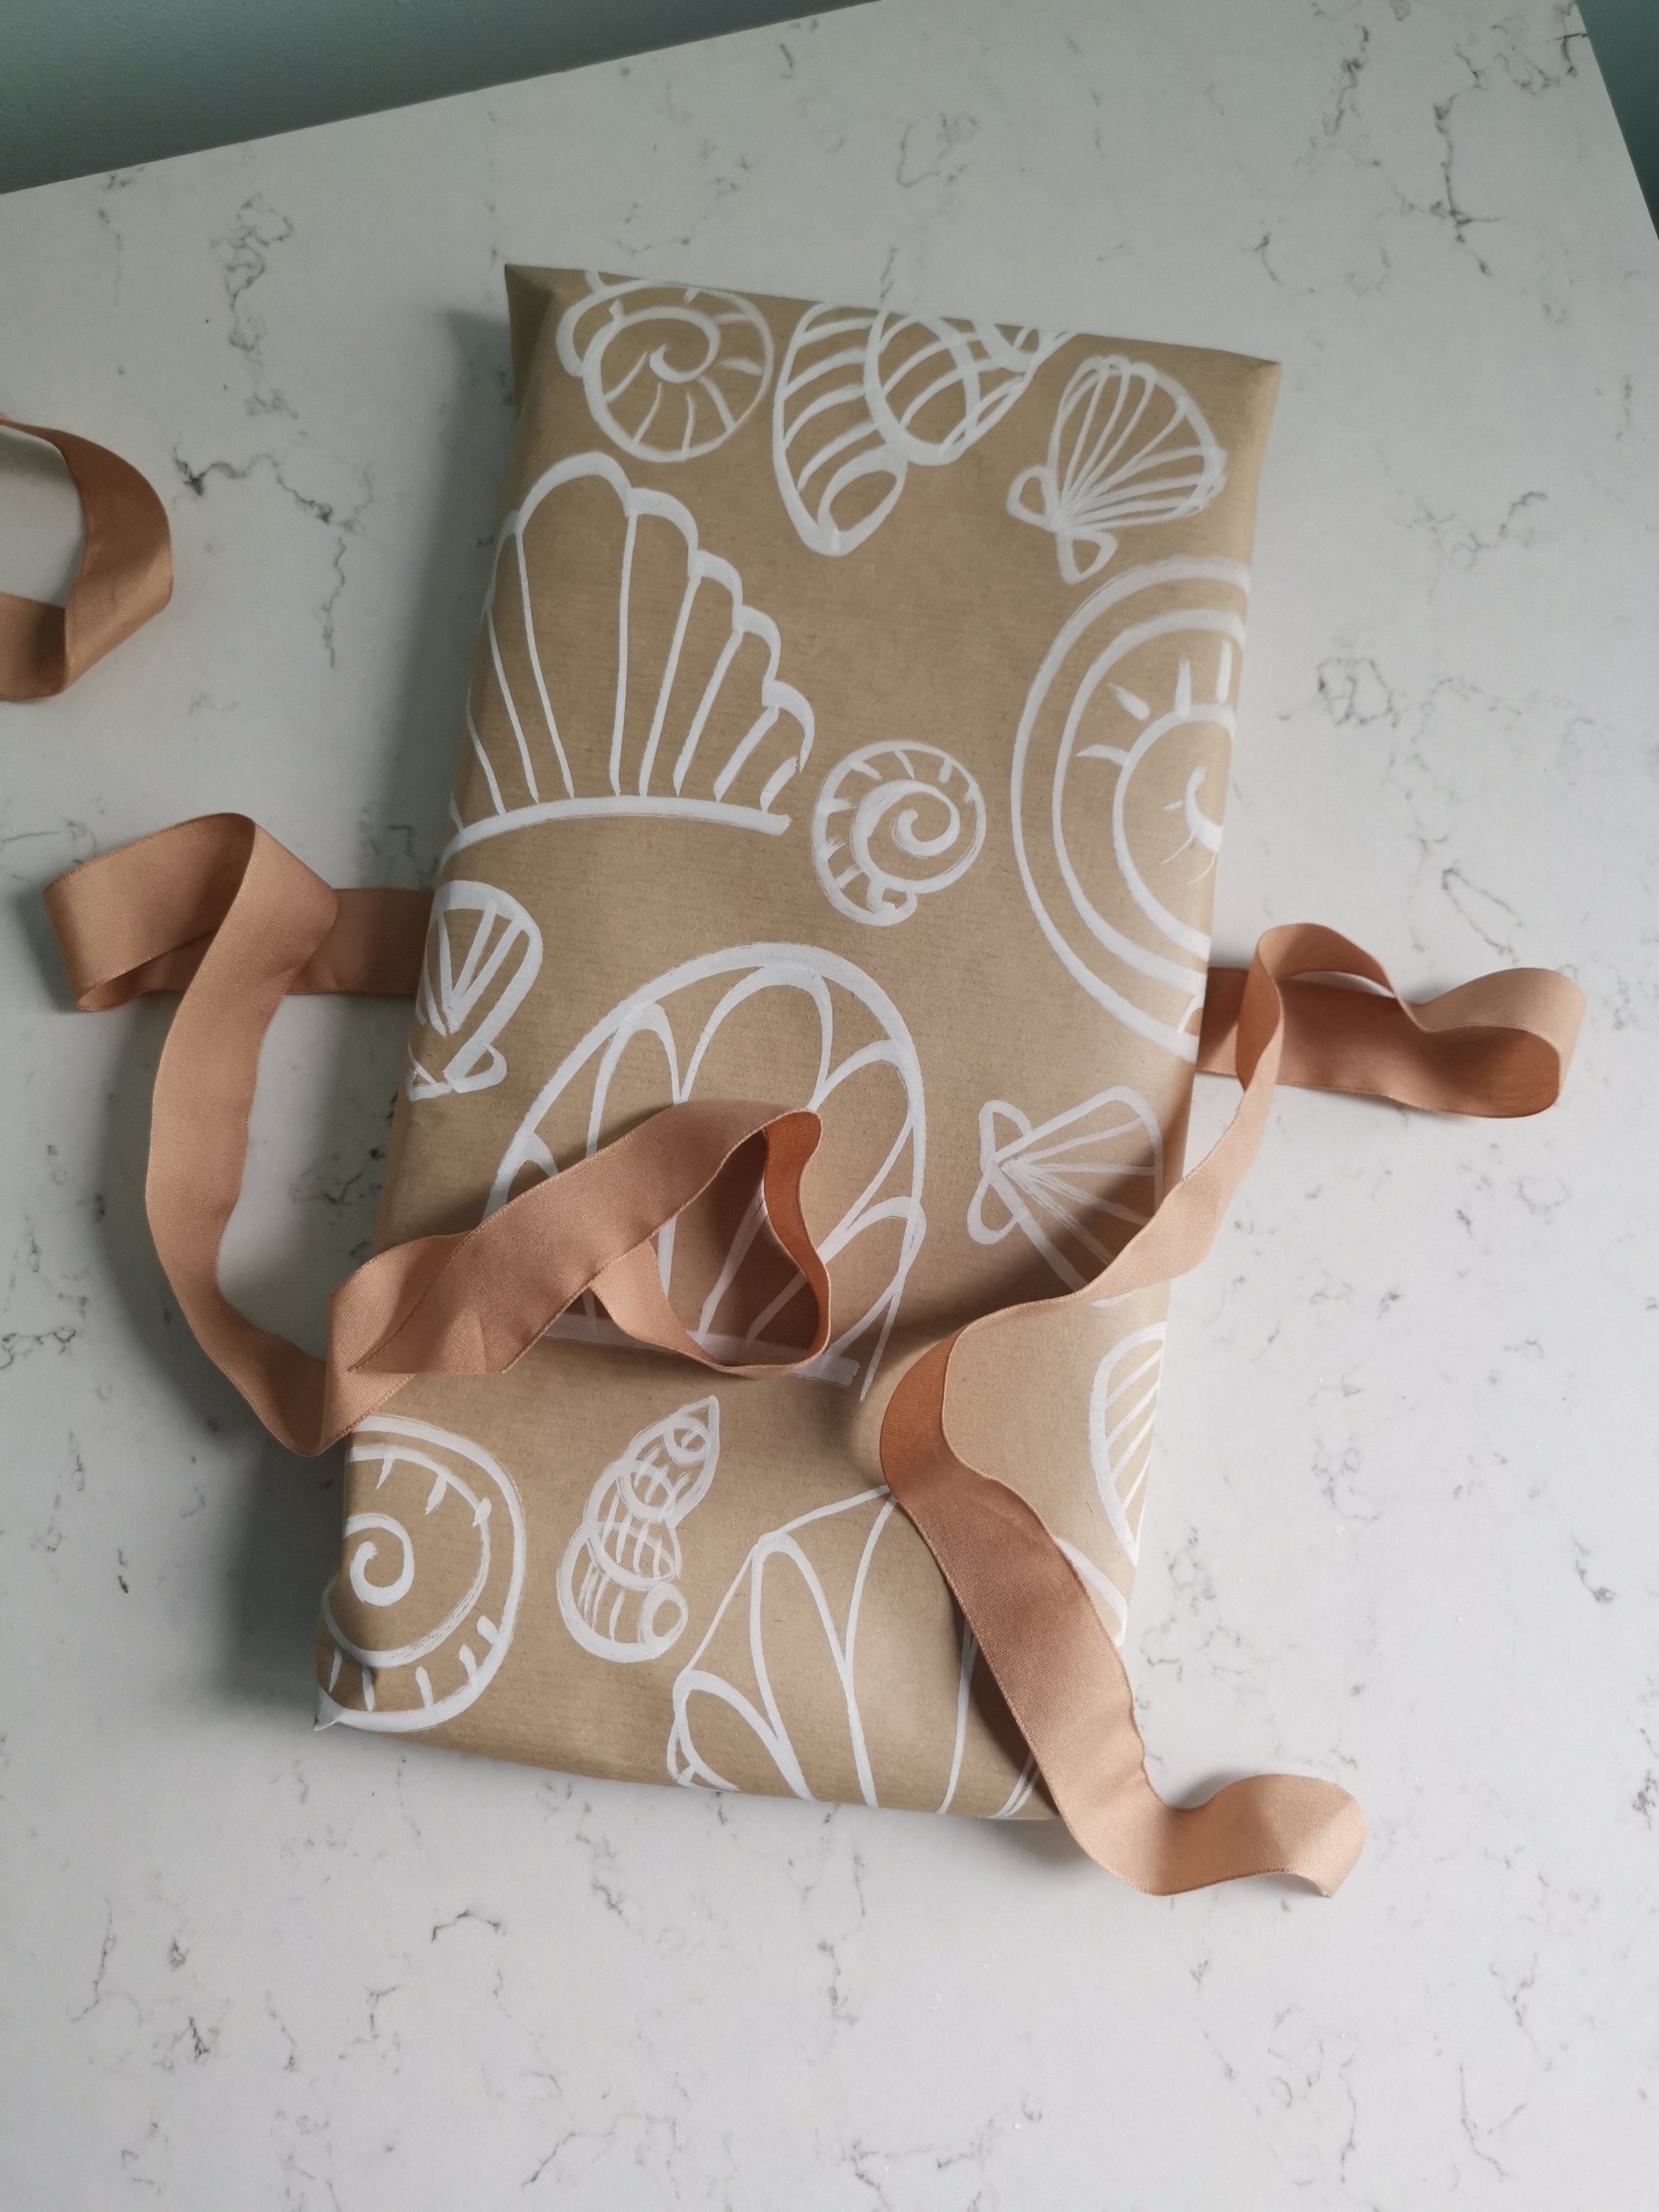 Make Your Own Seashell Wrapping Paper — Webb and Farrer - Flower